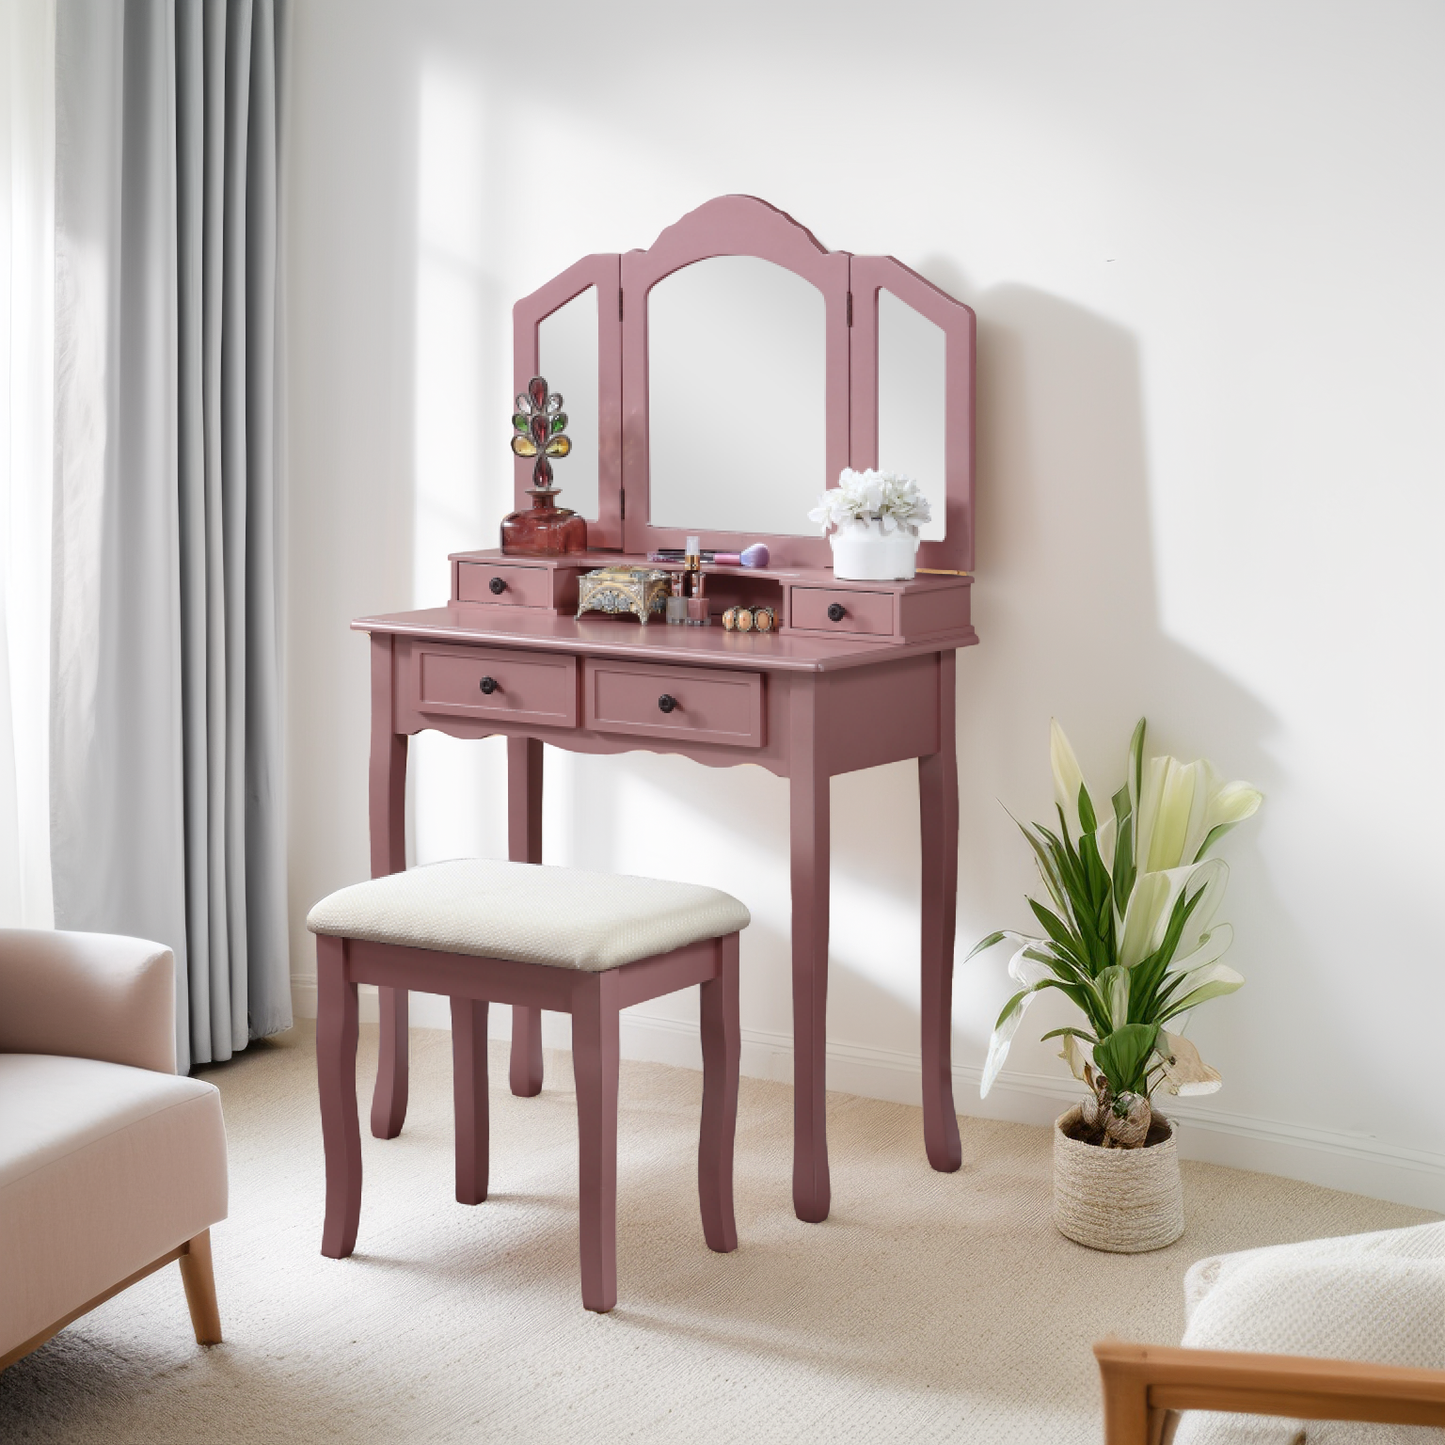 Sanlo Wooden Vanity Make Up Table and Stool Set, Rose Gold